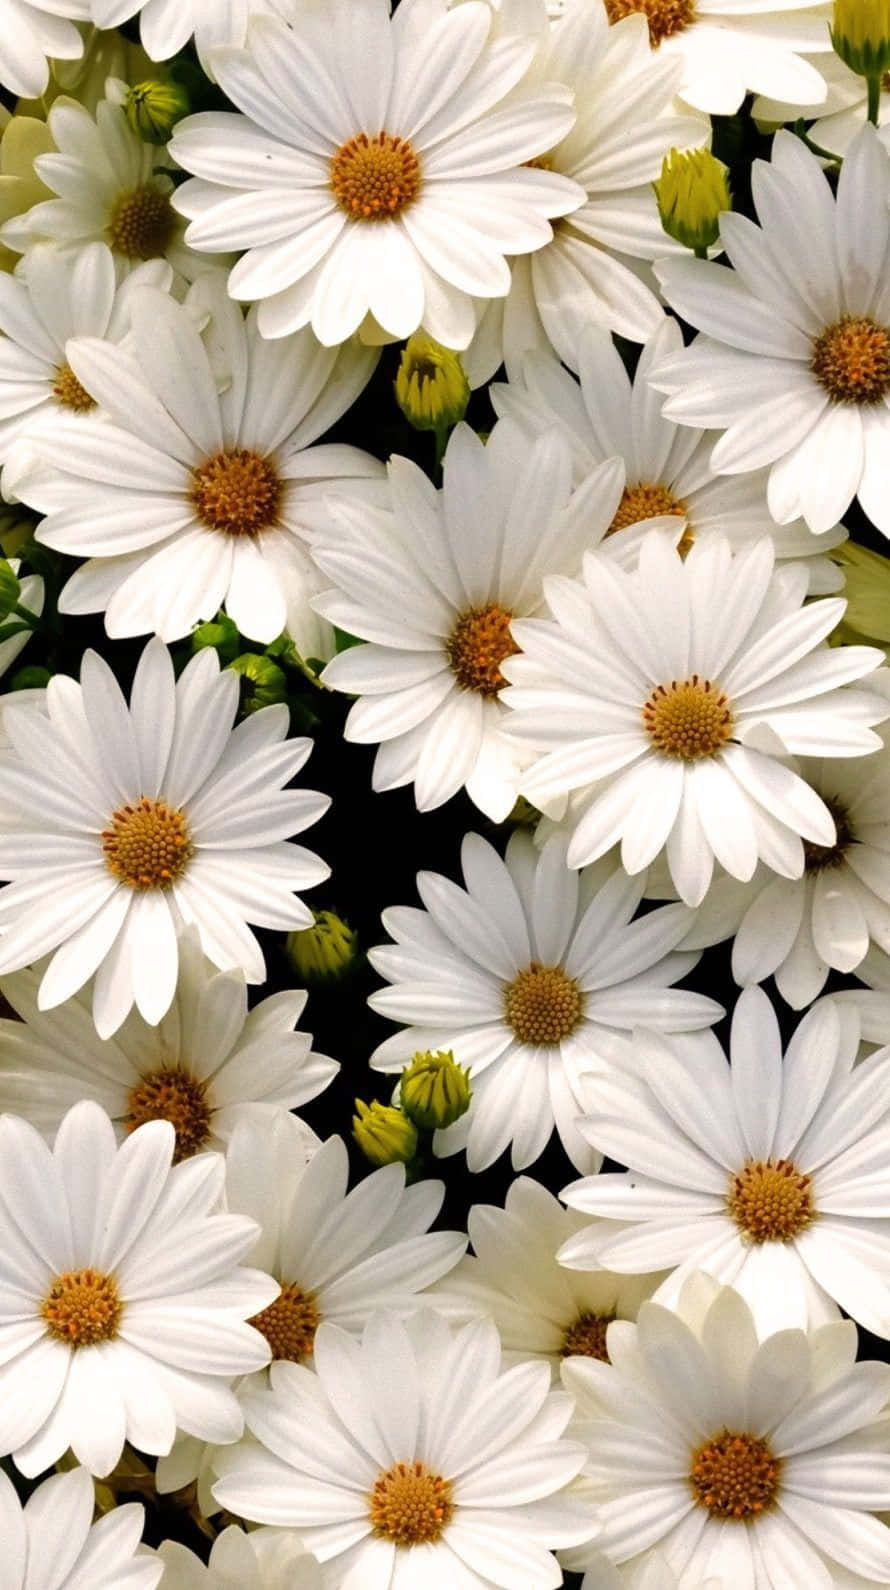 Aesthetic Daisy Blooming in the Meadow Wallpaper